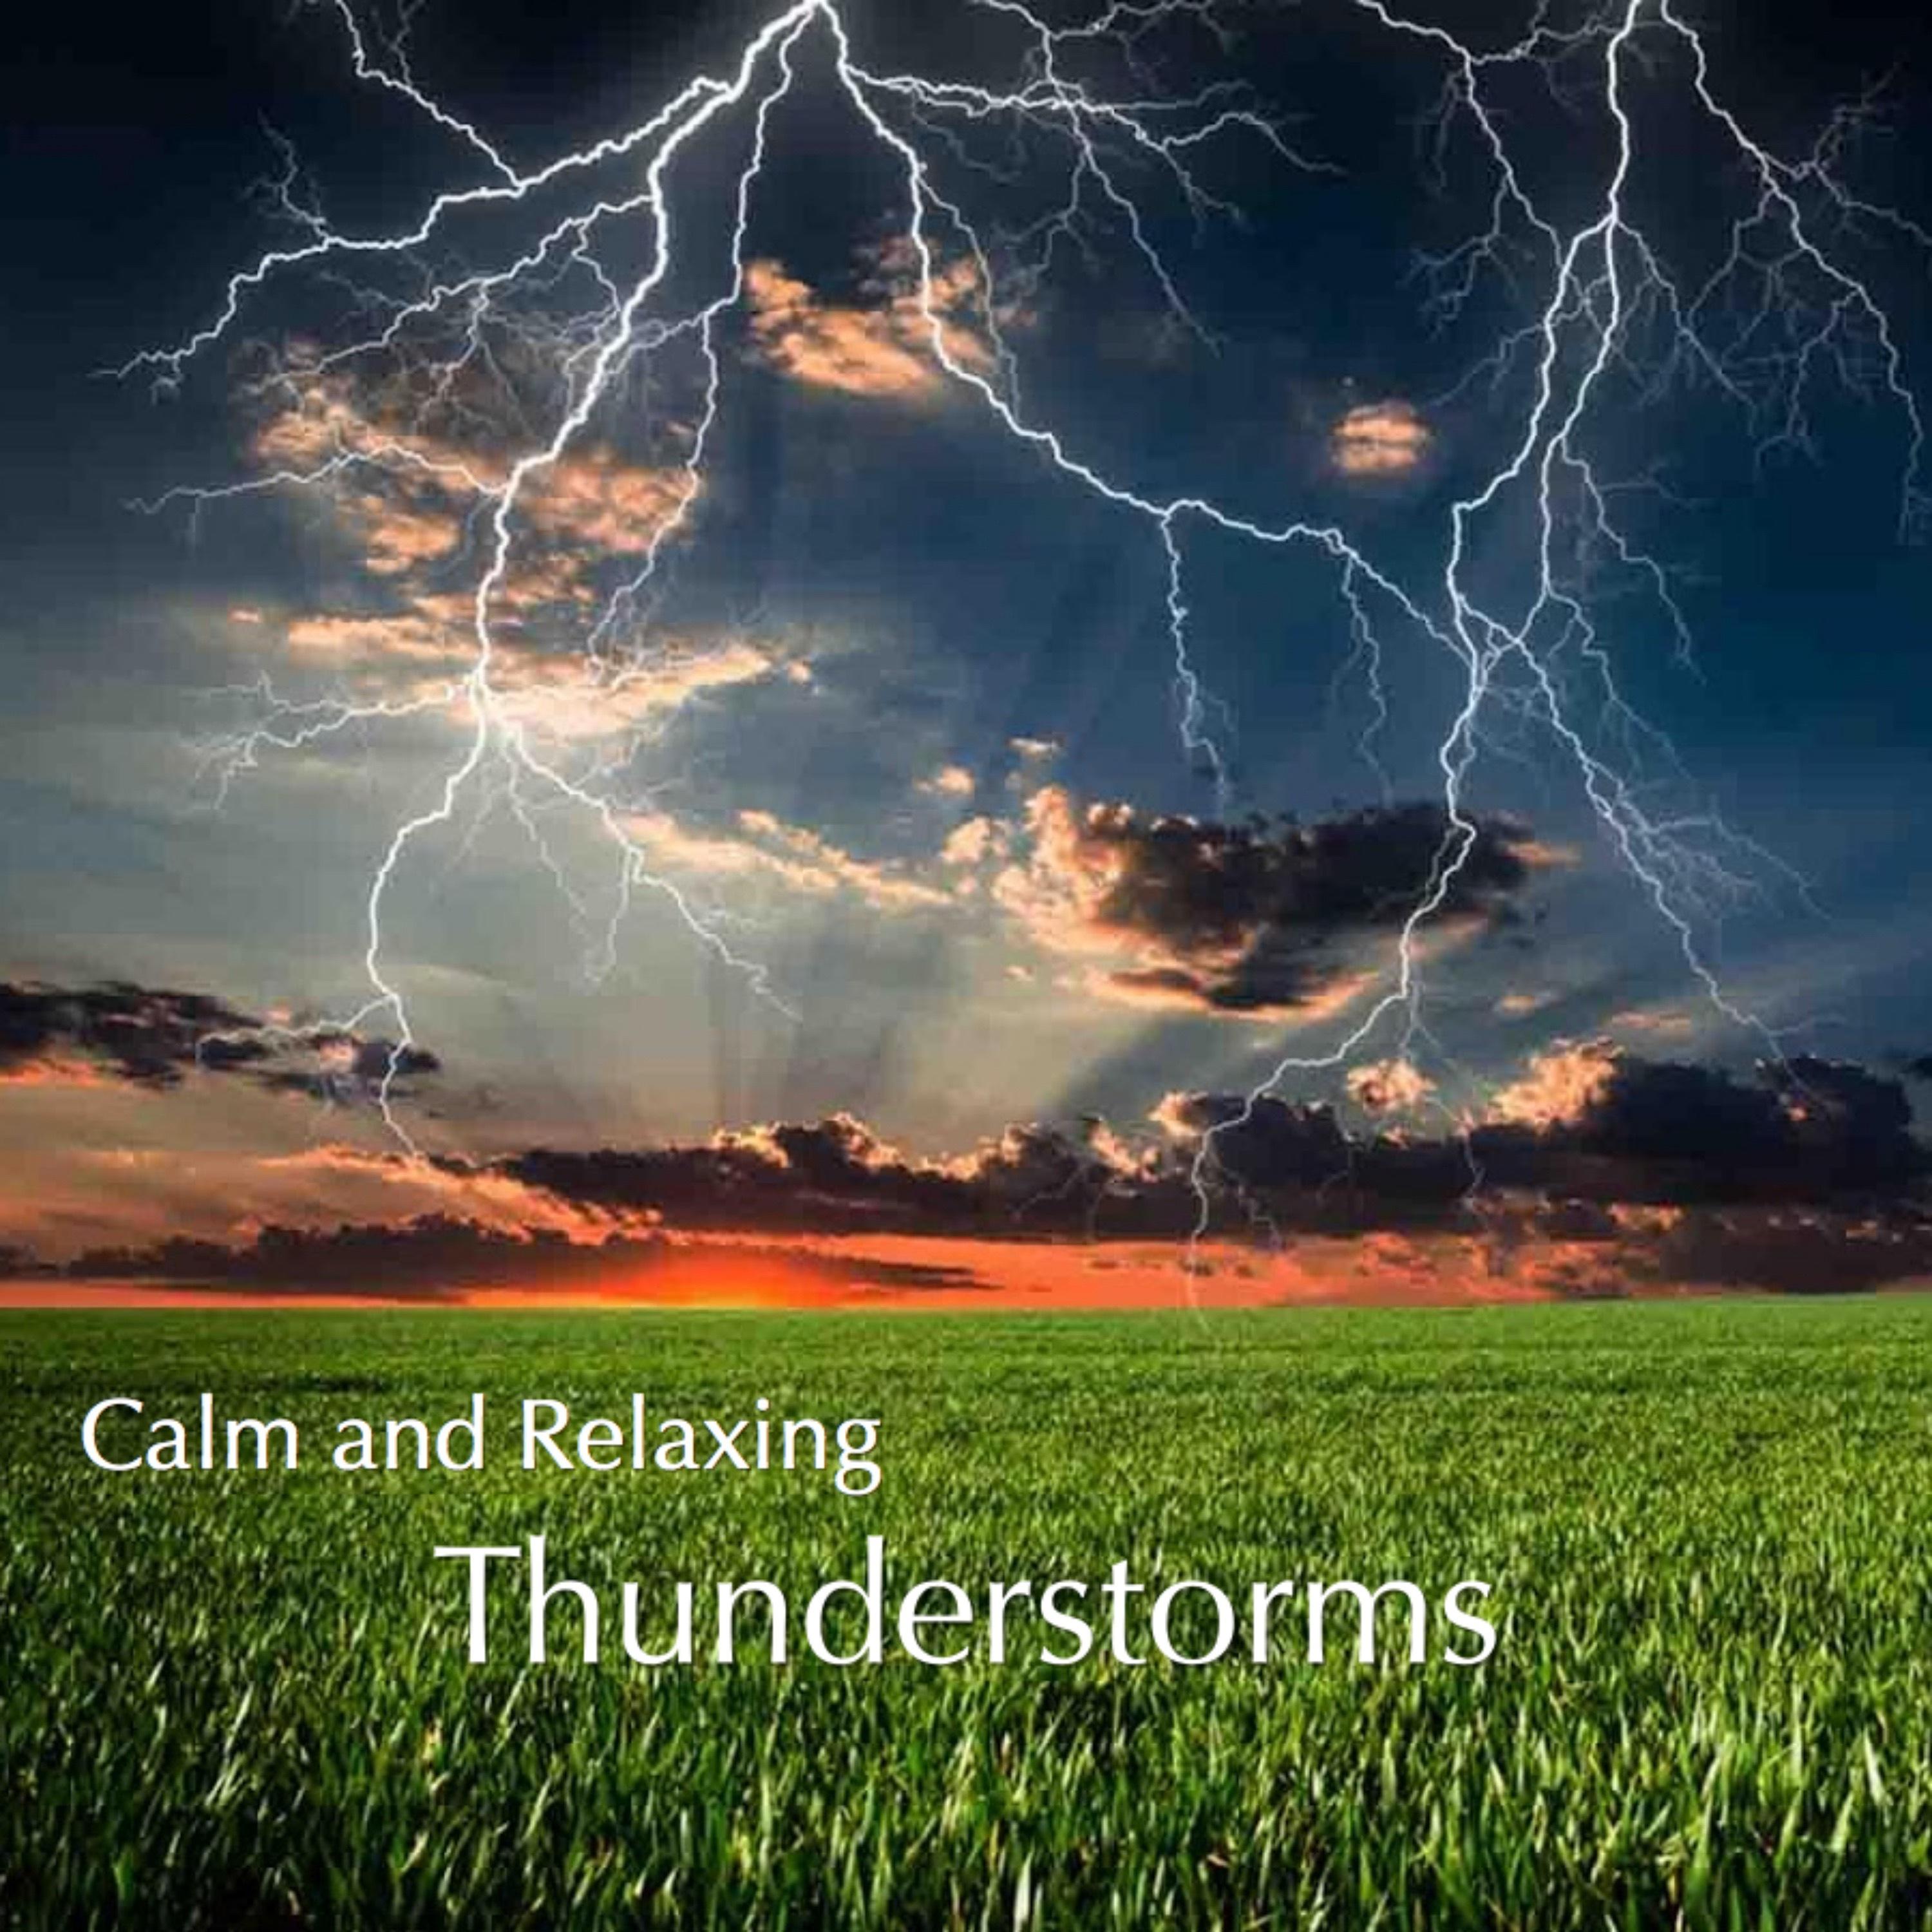 Calm and Relaxing Thunderstorms